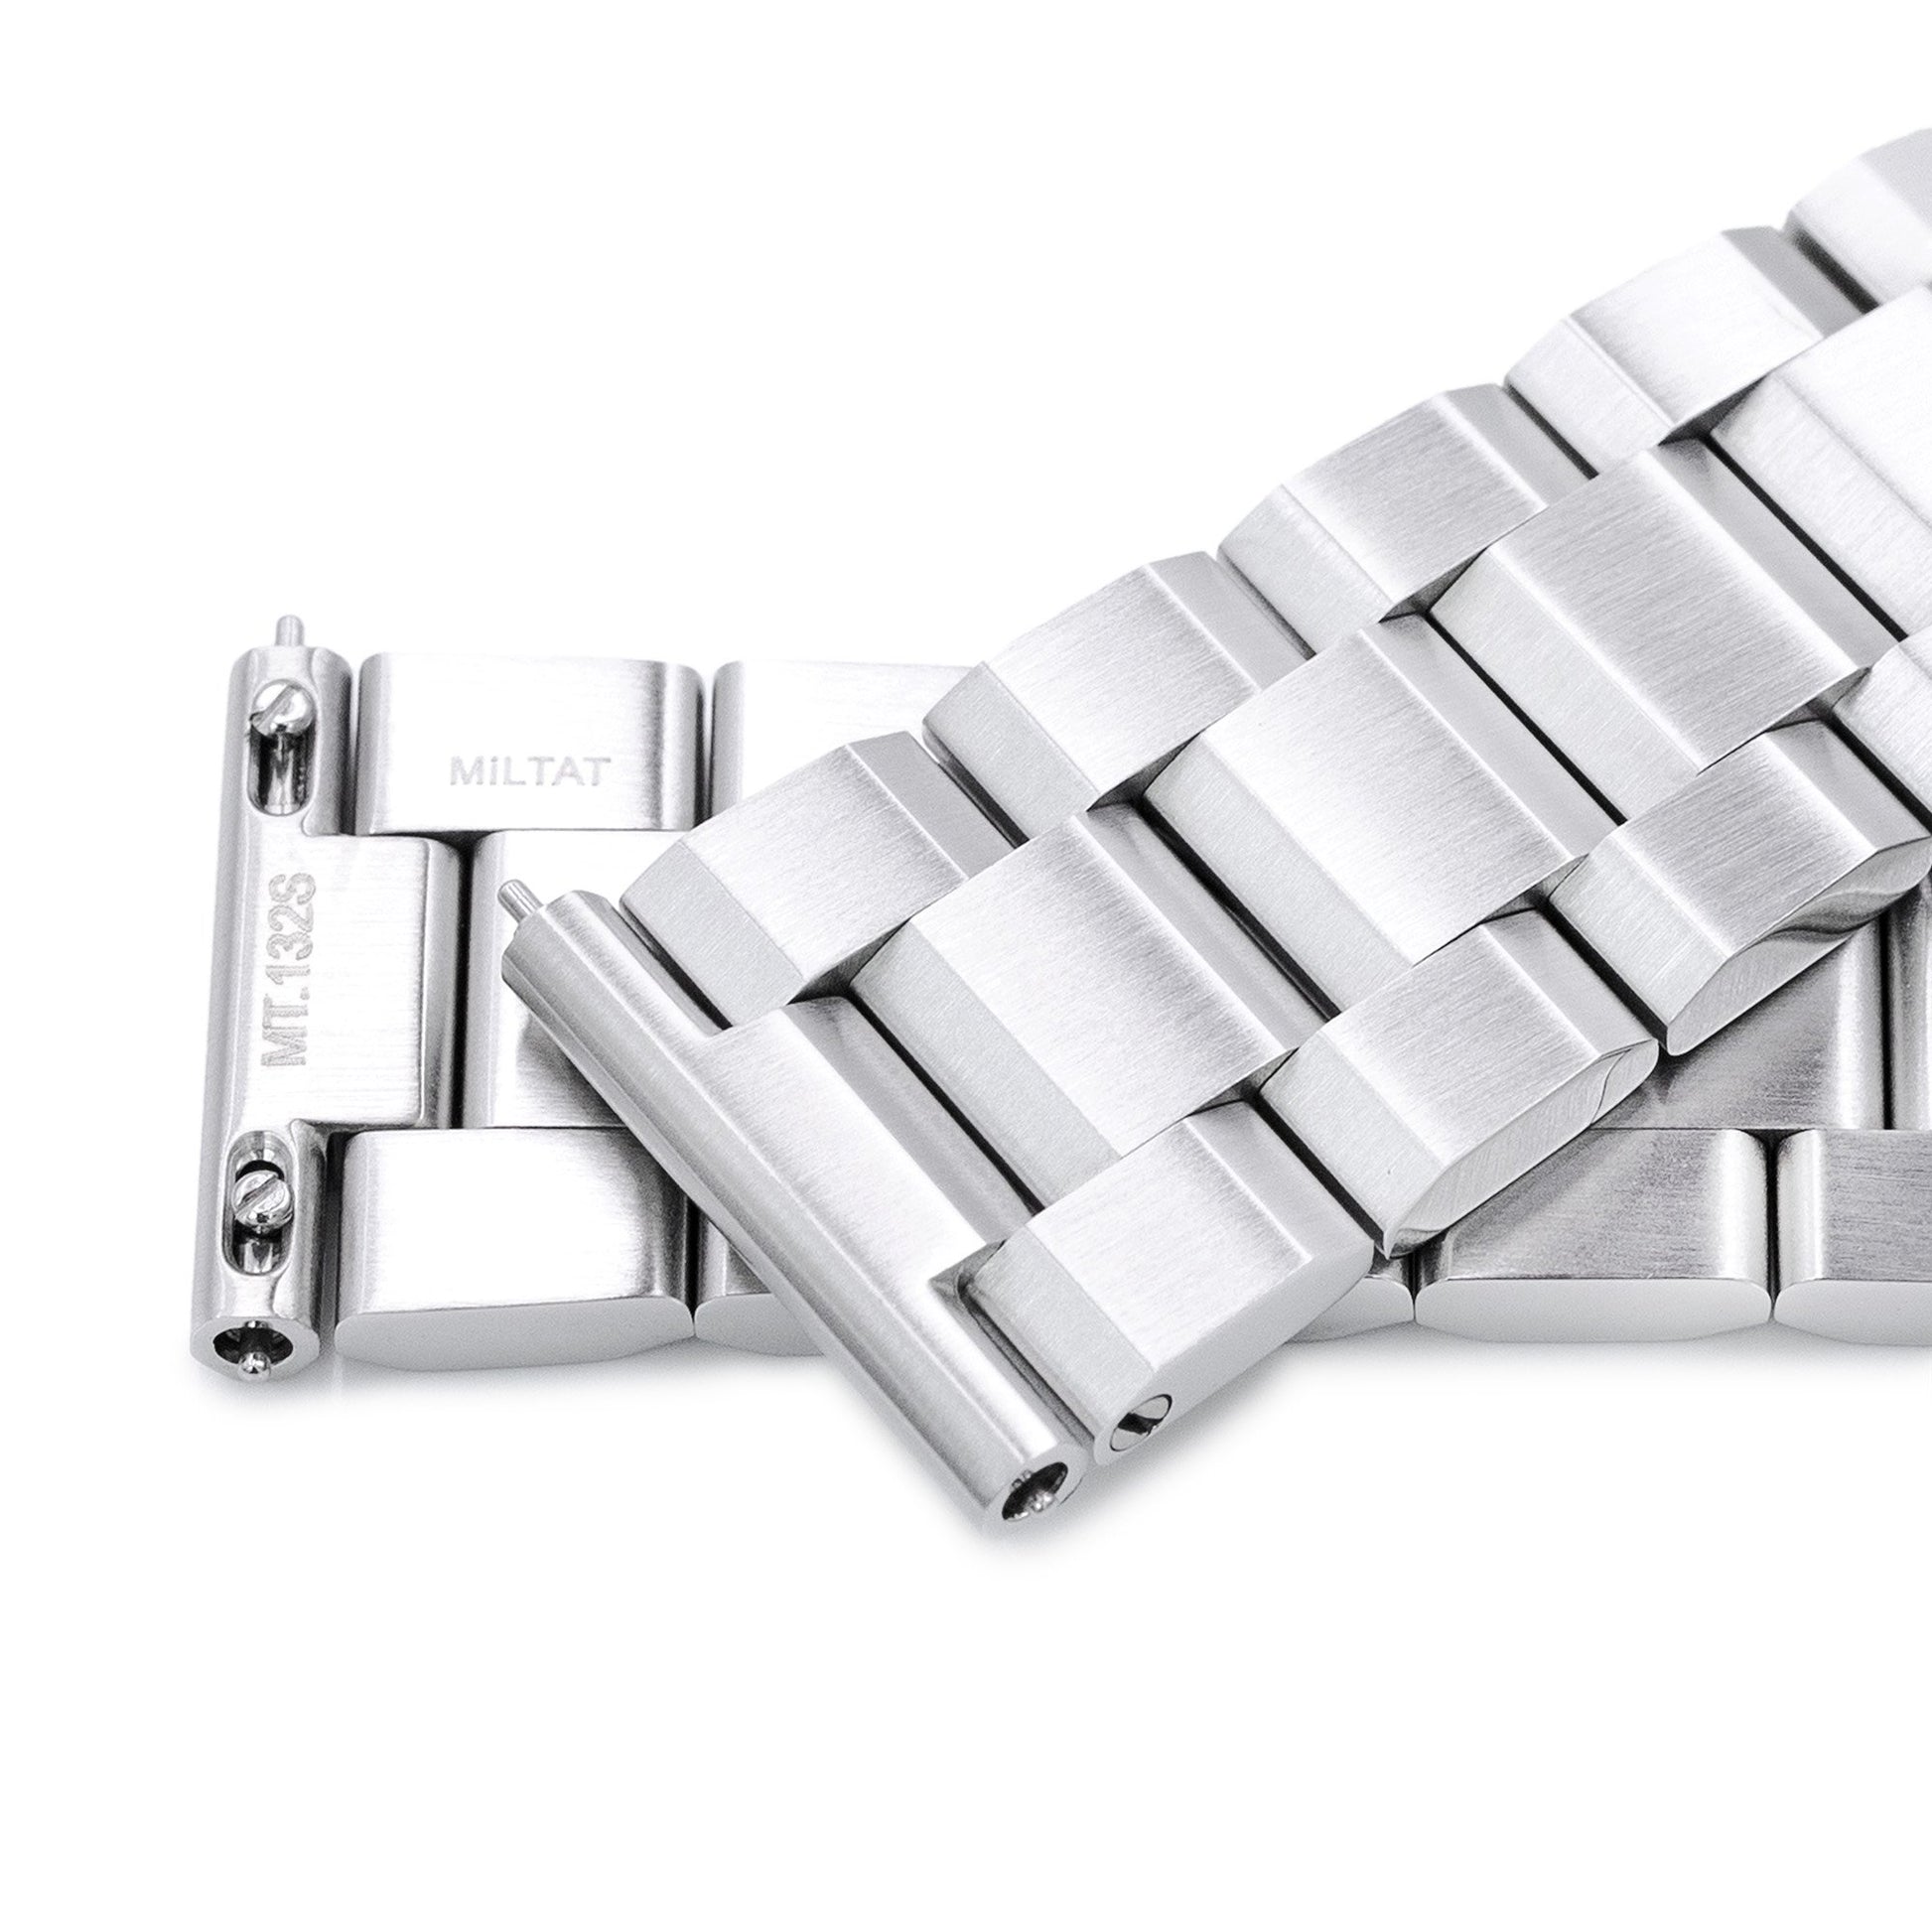 20mm Hexad III QR Watch Band Straight End Quick Release, 316L Stainless Steel Brushed V-Clasp